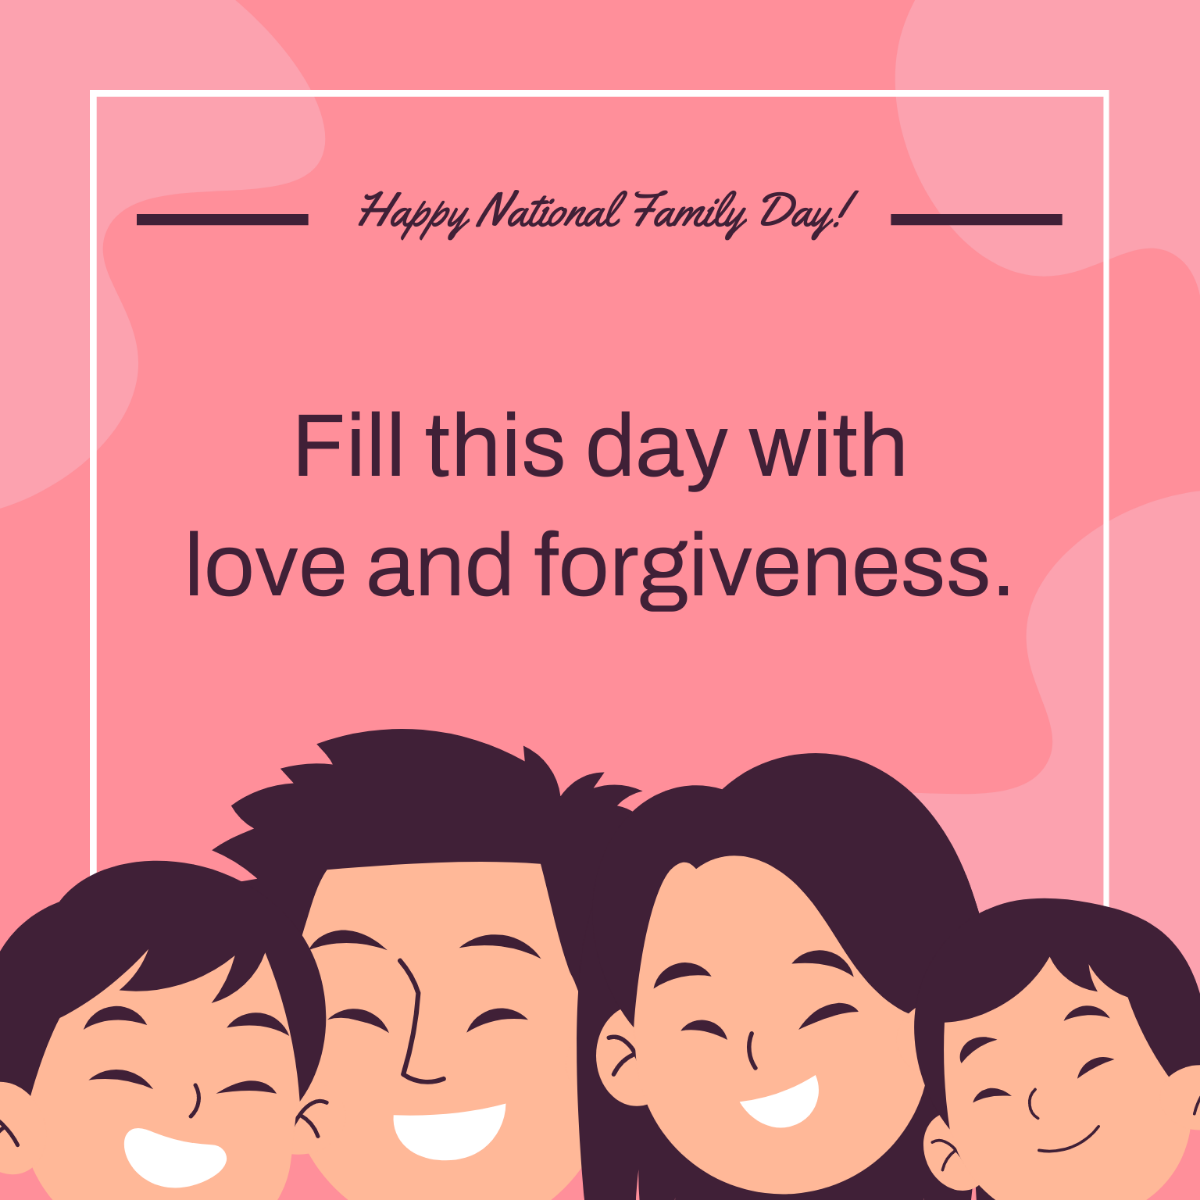 Free National Family Day Greeting Card Vector Template